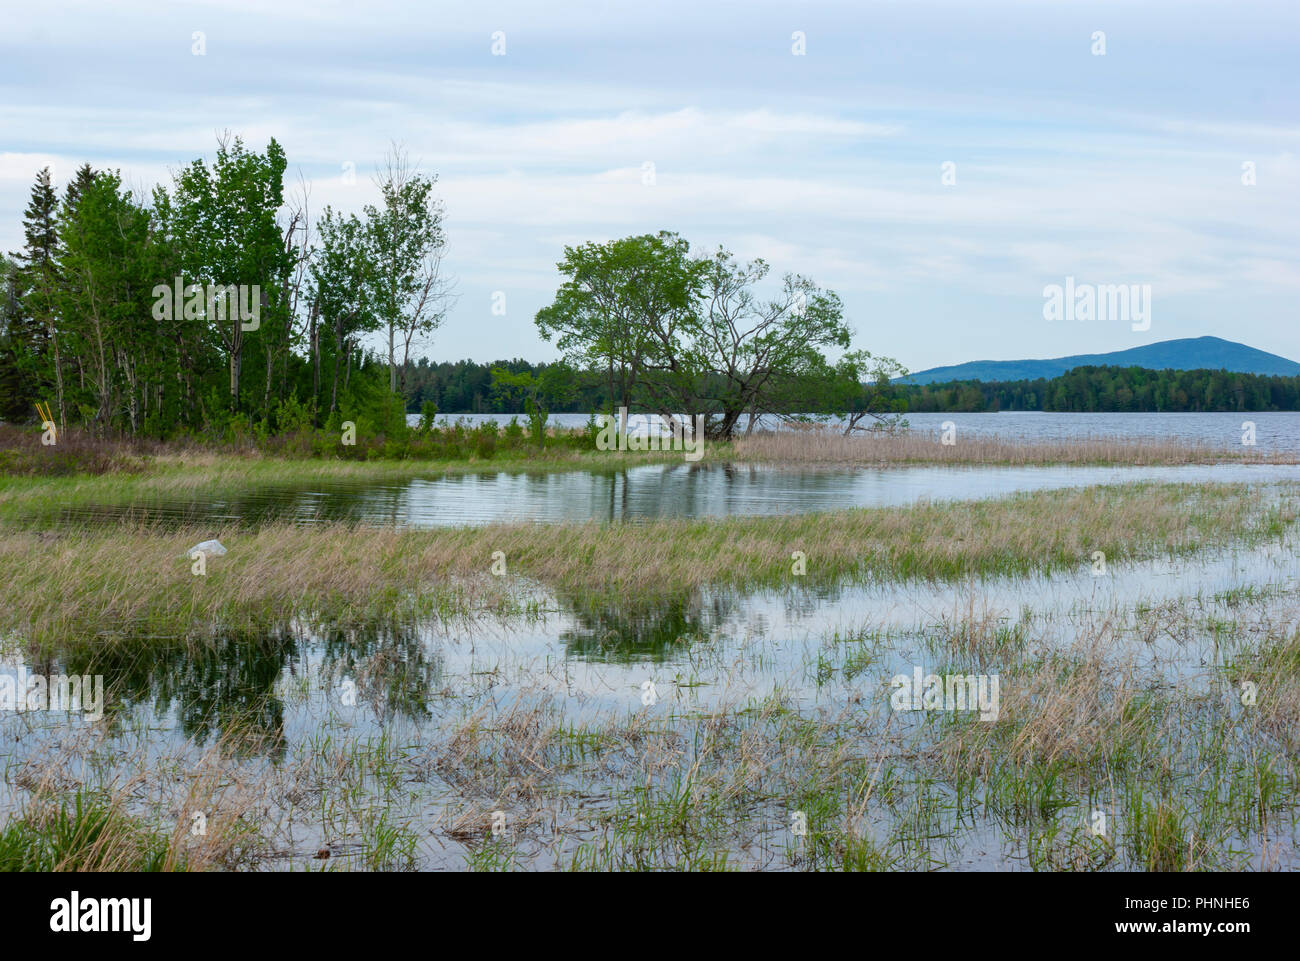 Landscape with a small grove of trees and cordgrass on the marshy shore of Flagstaff Lake. Scenic overlook on High Peaks Scenic Byway. Eustis, Maine. Stock Photo